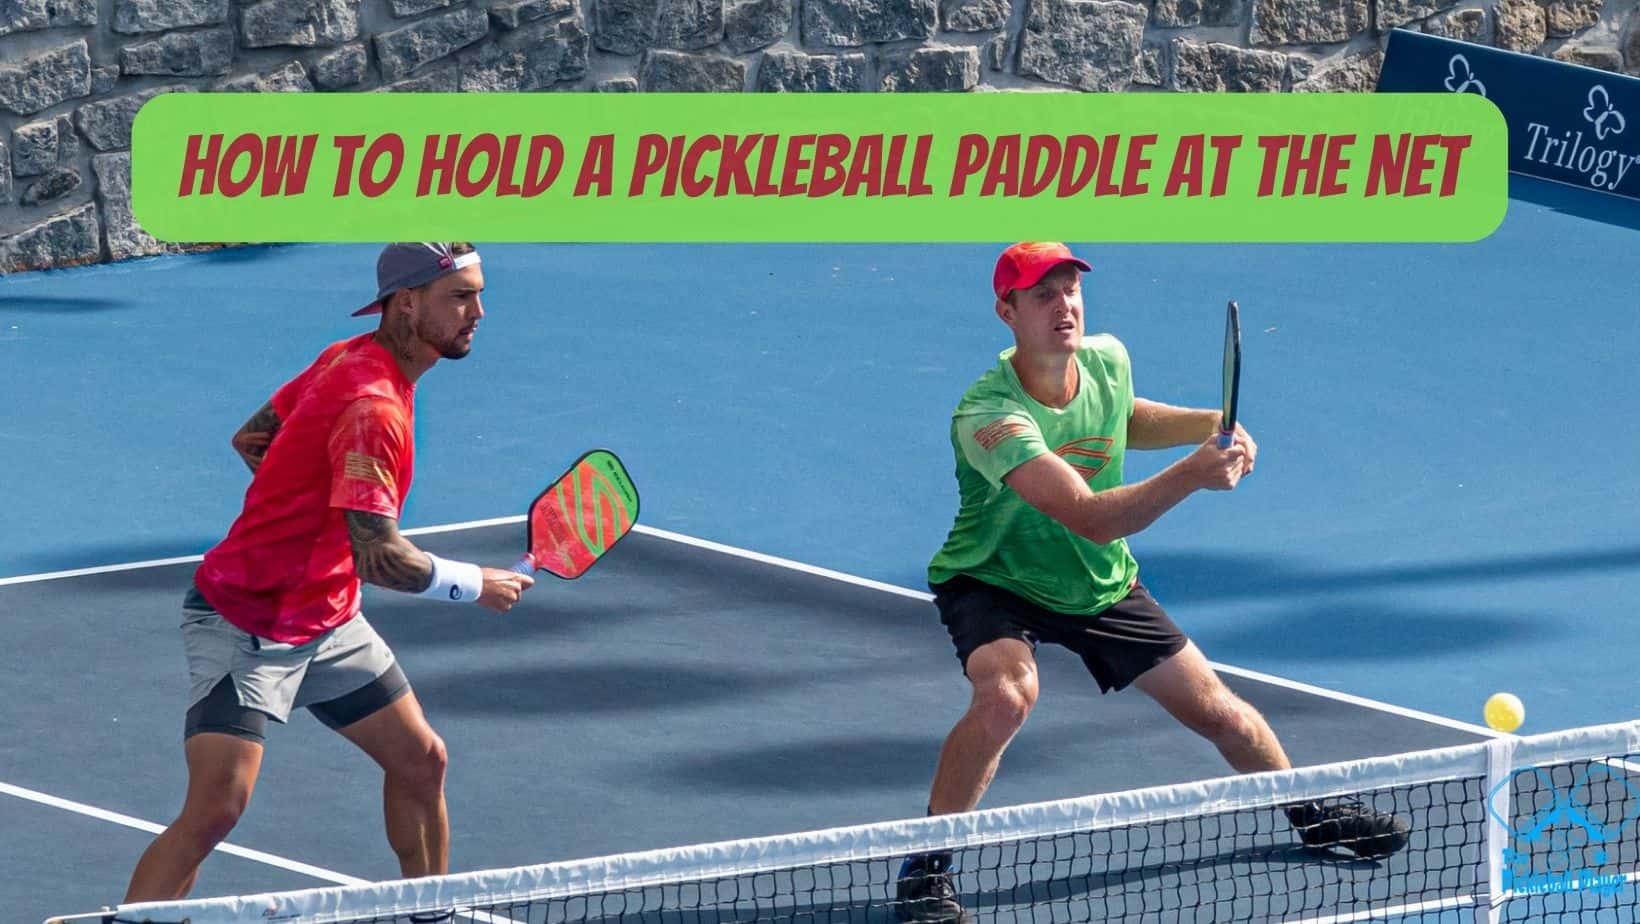 How to Hold a Pickleball Paddle at the Net